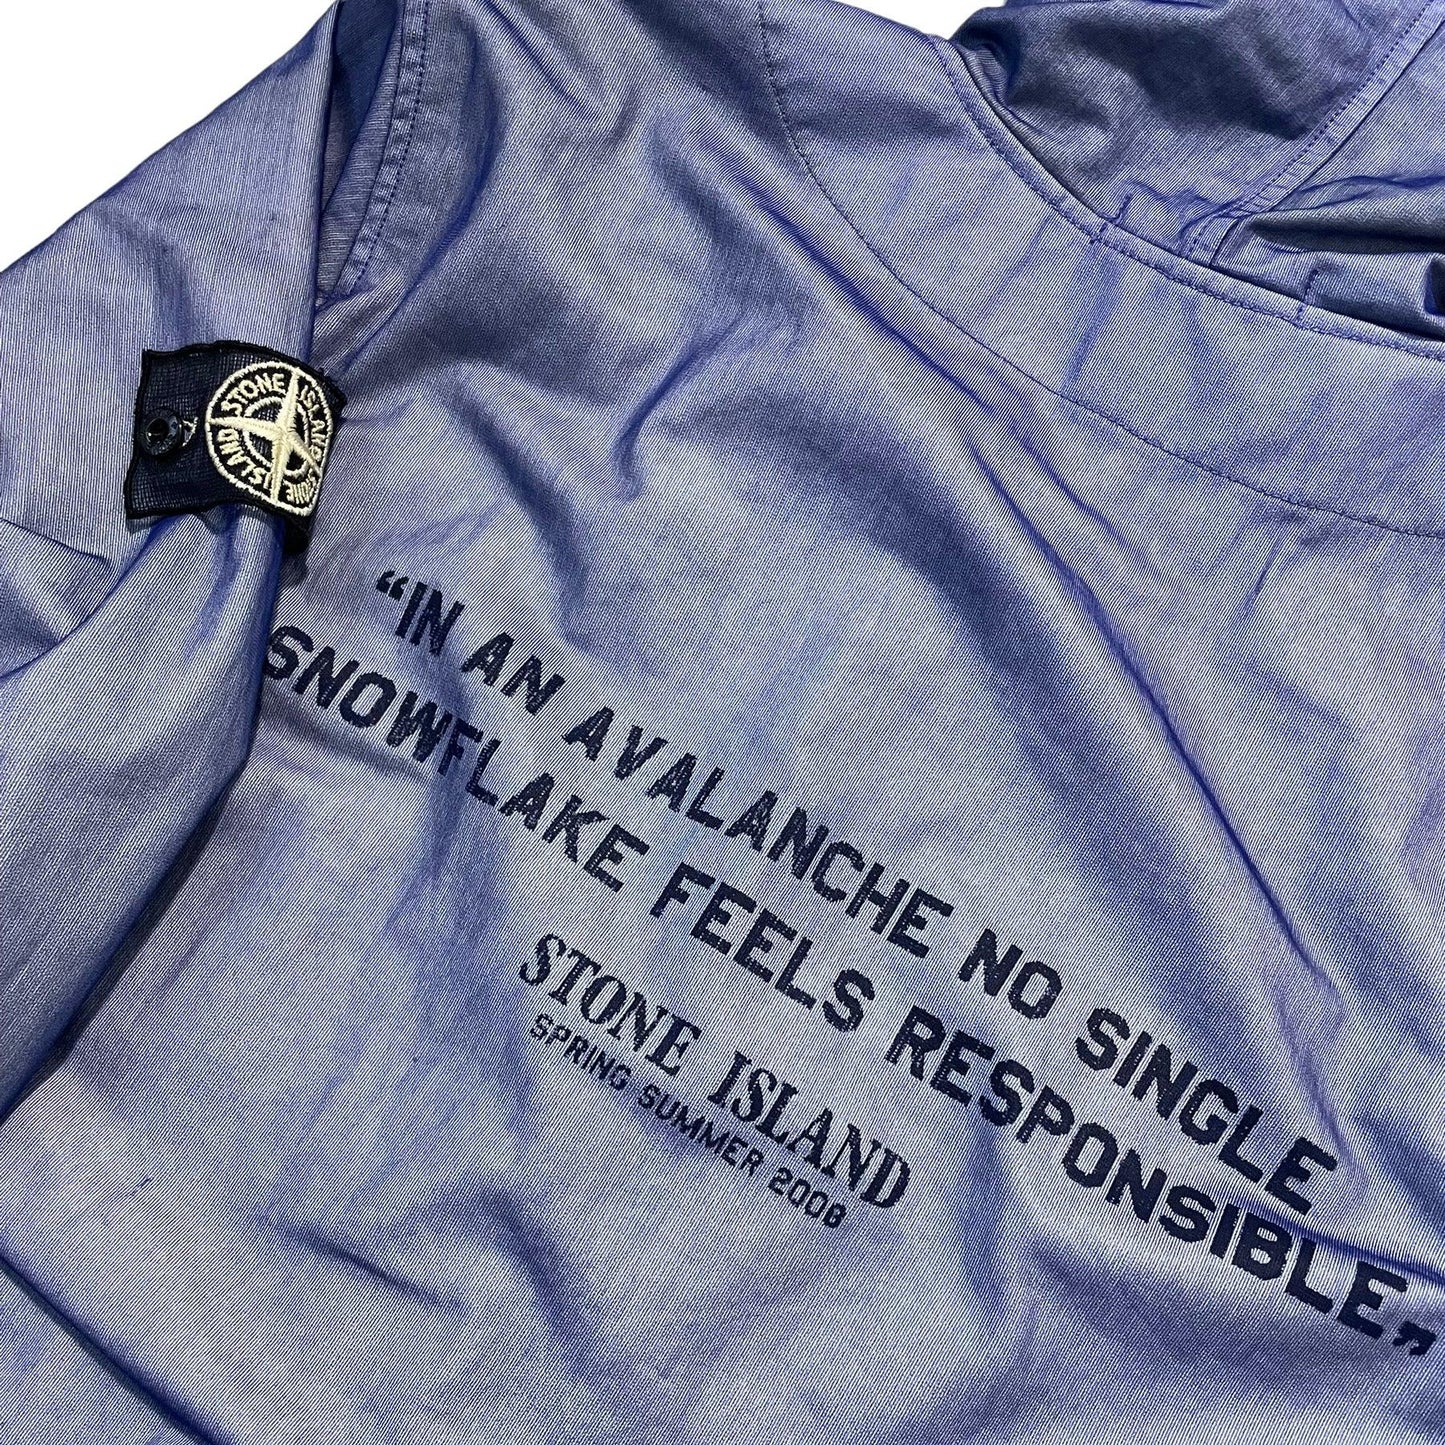 Stone Island Snowflake “In an avalanche no single snowflake feels responsible” Tyvek Jacket with Mesh Special Process Badge - Known Source